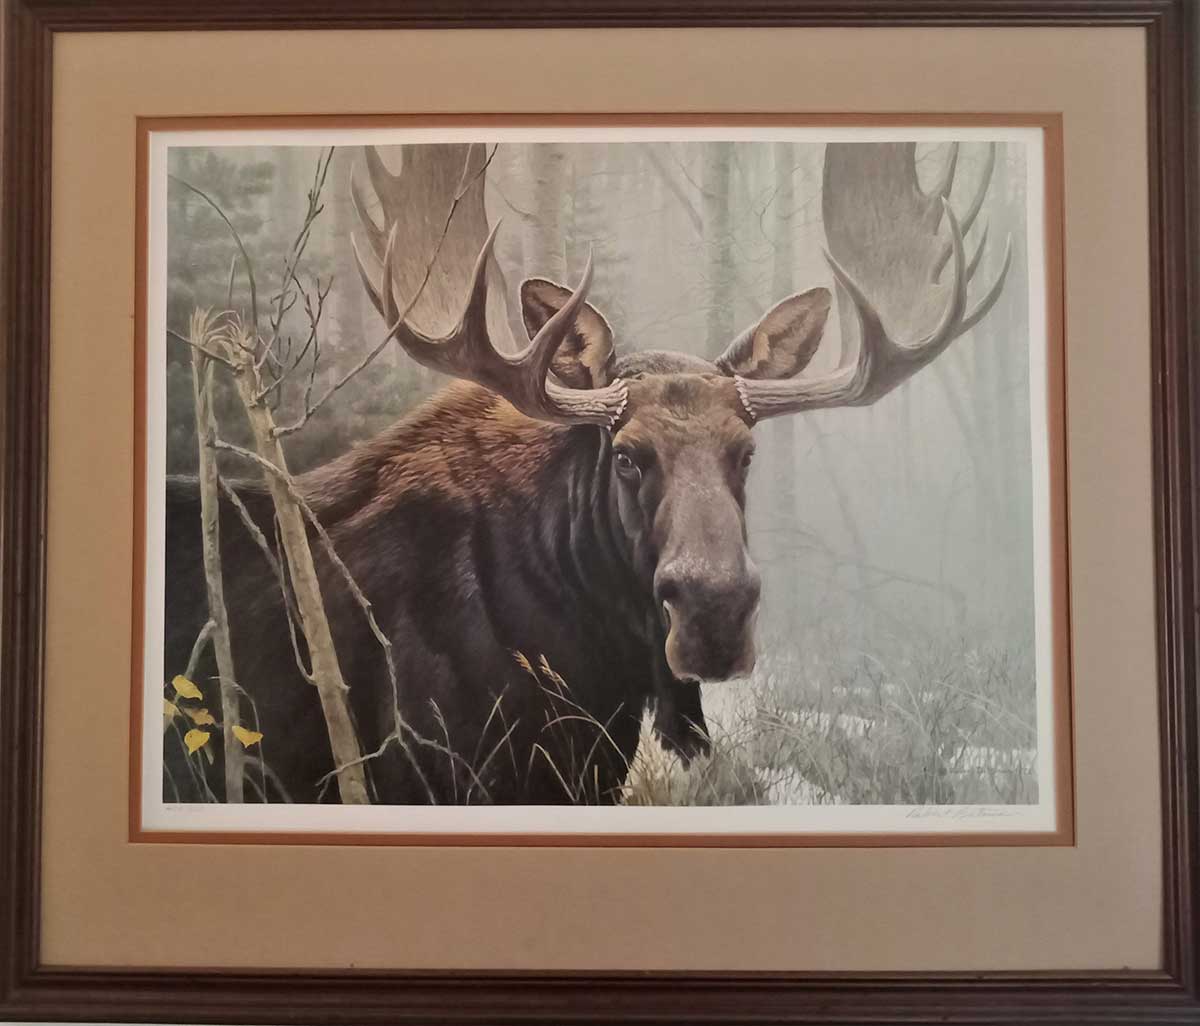 A Robert Bateman Lithographic Print from the Greenwich Workshop titled Bull Moose